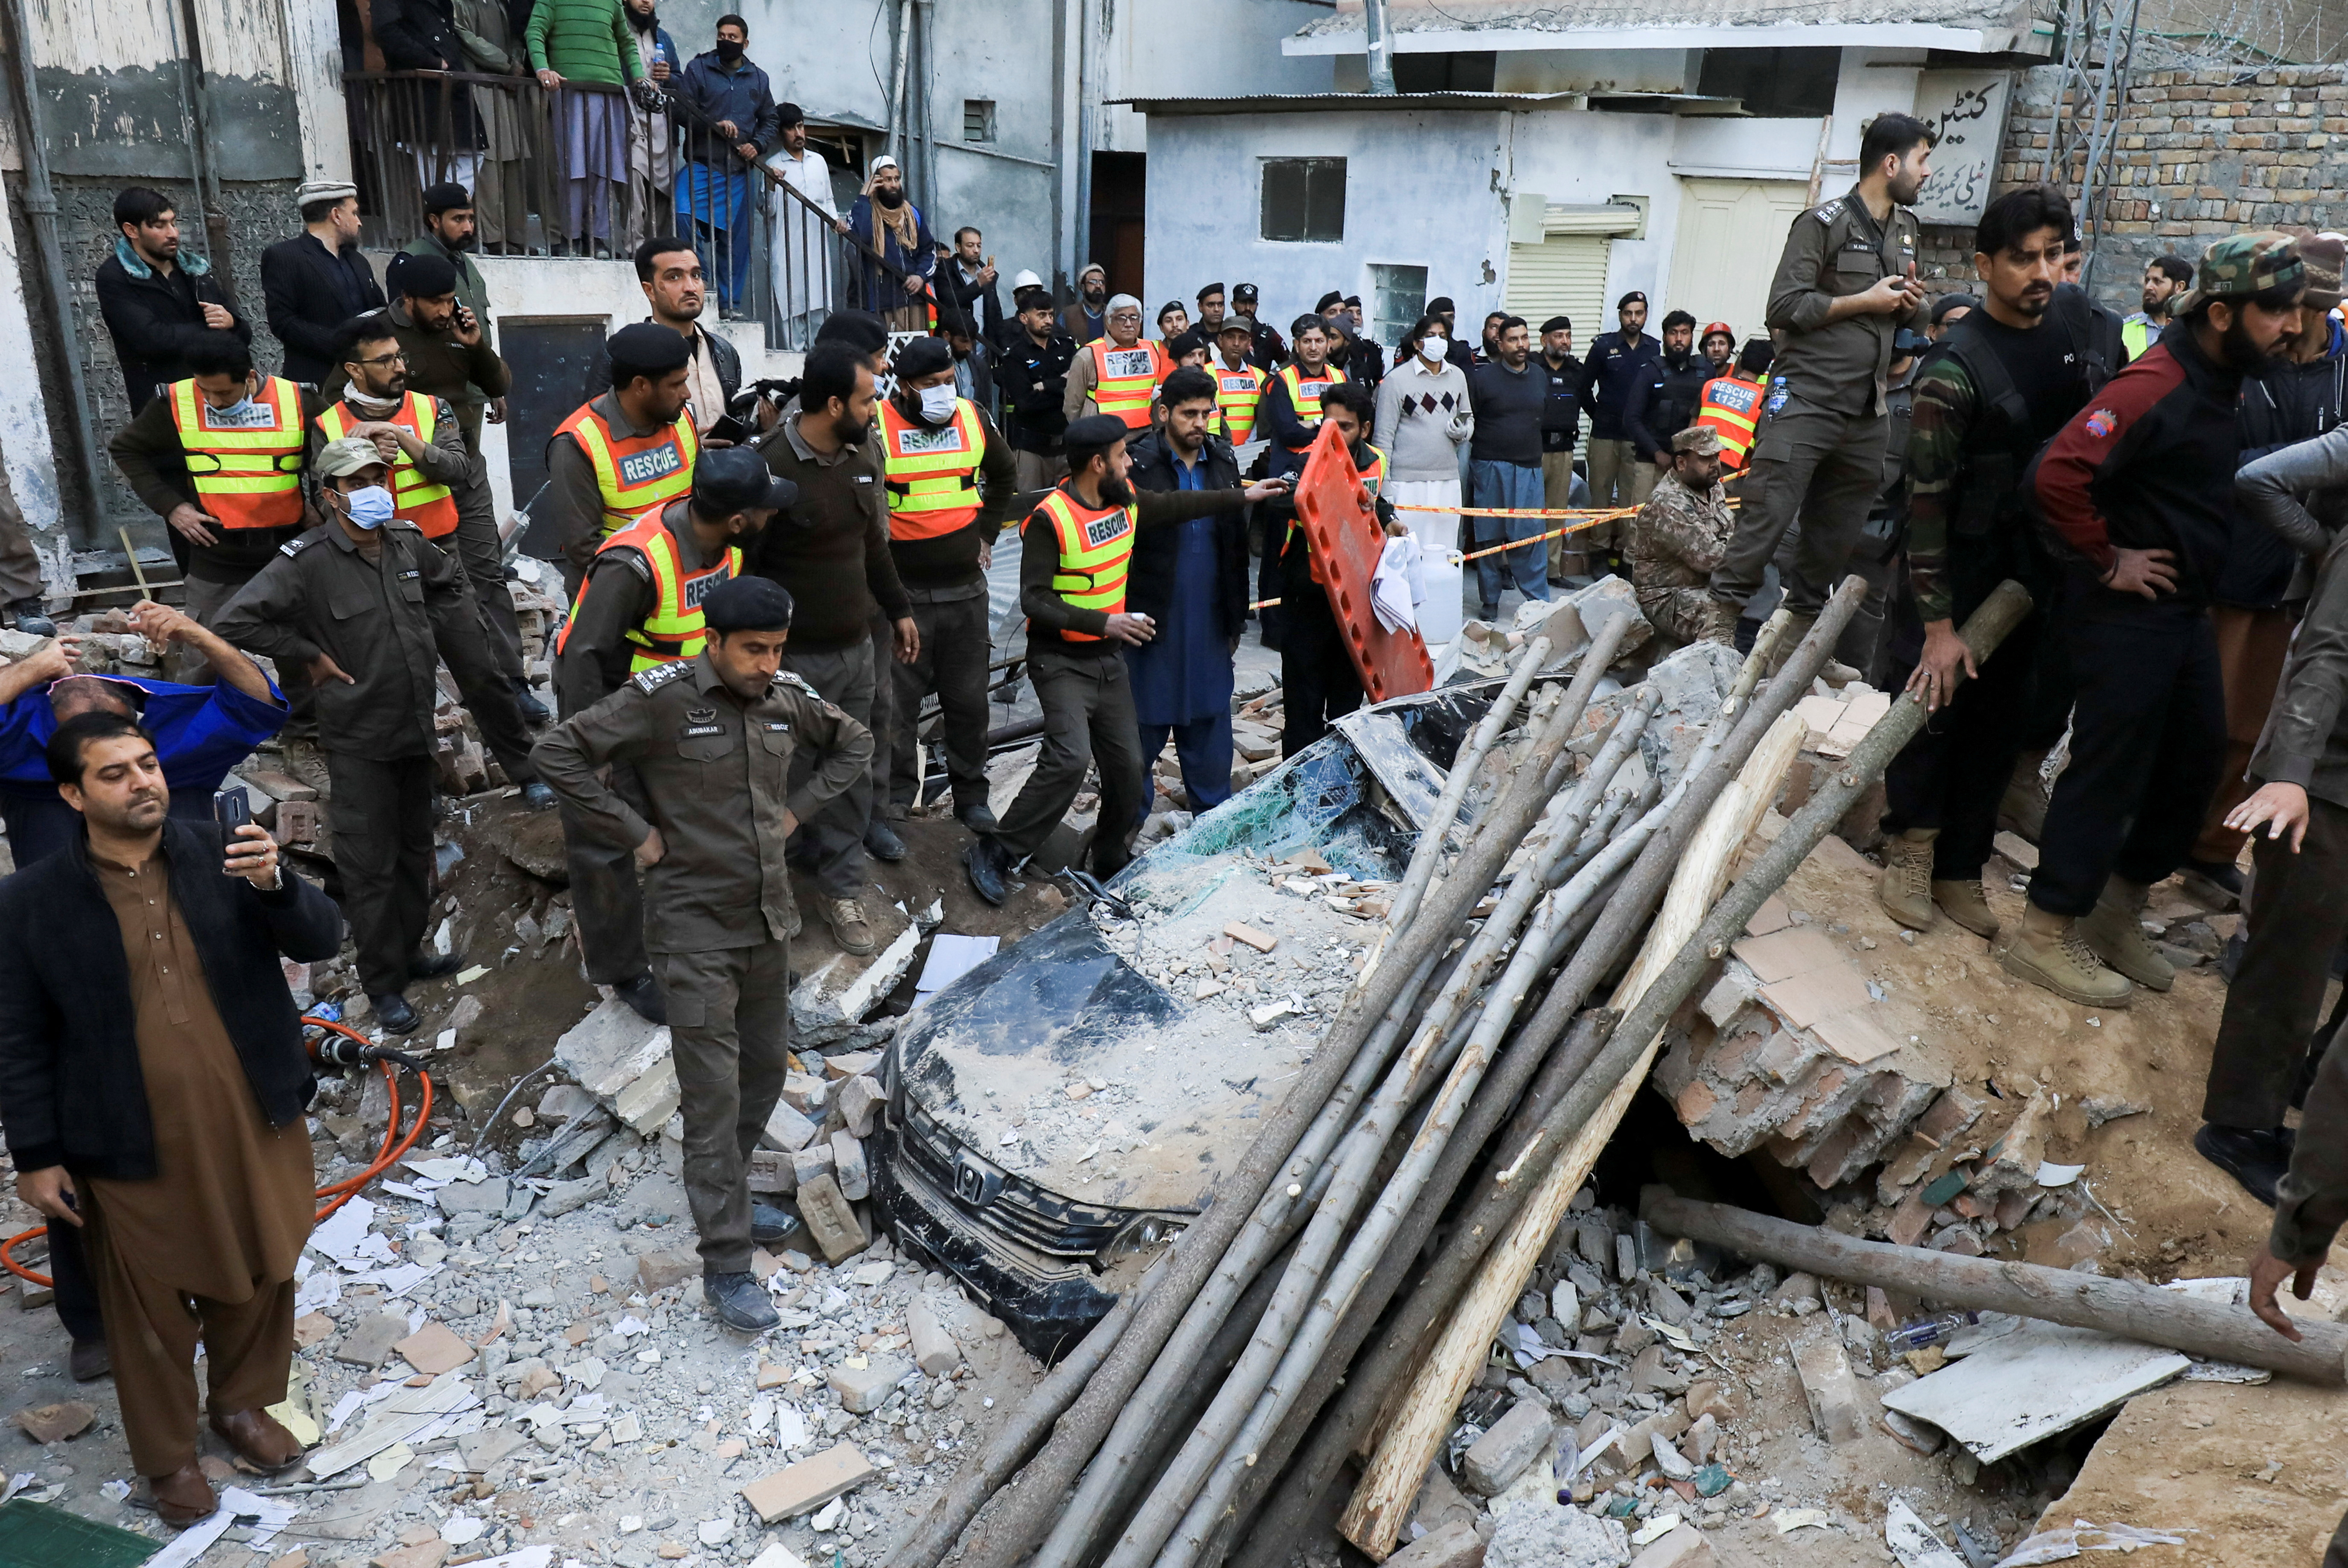 People and rescue workers gather amid the damages, after a suicide blast in a mosque in Peshawar